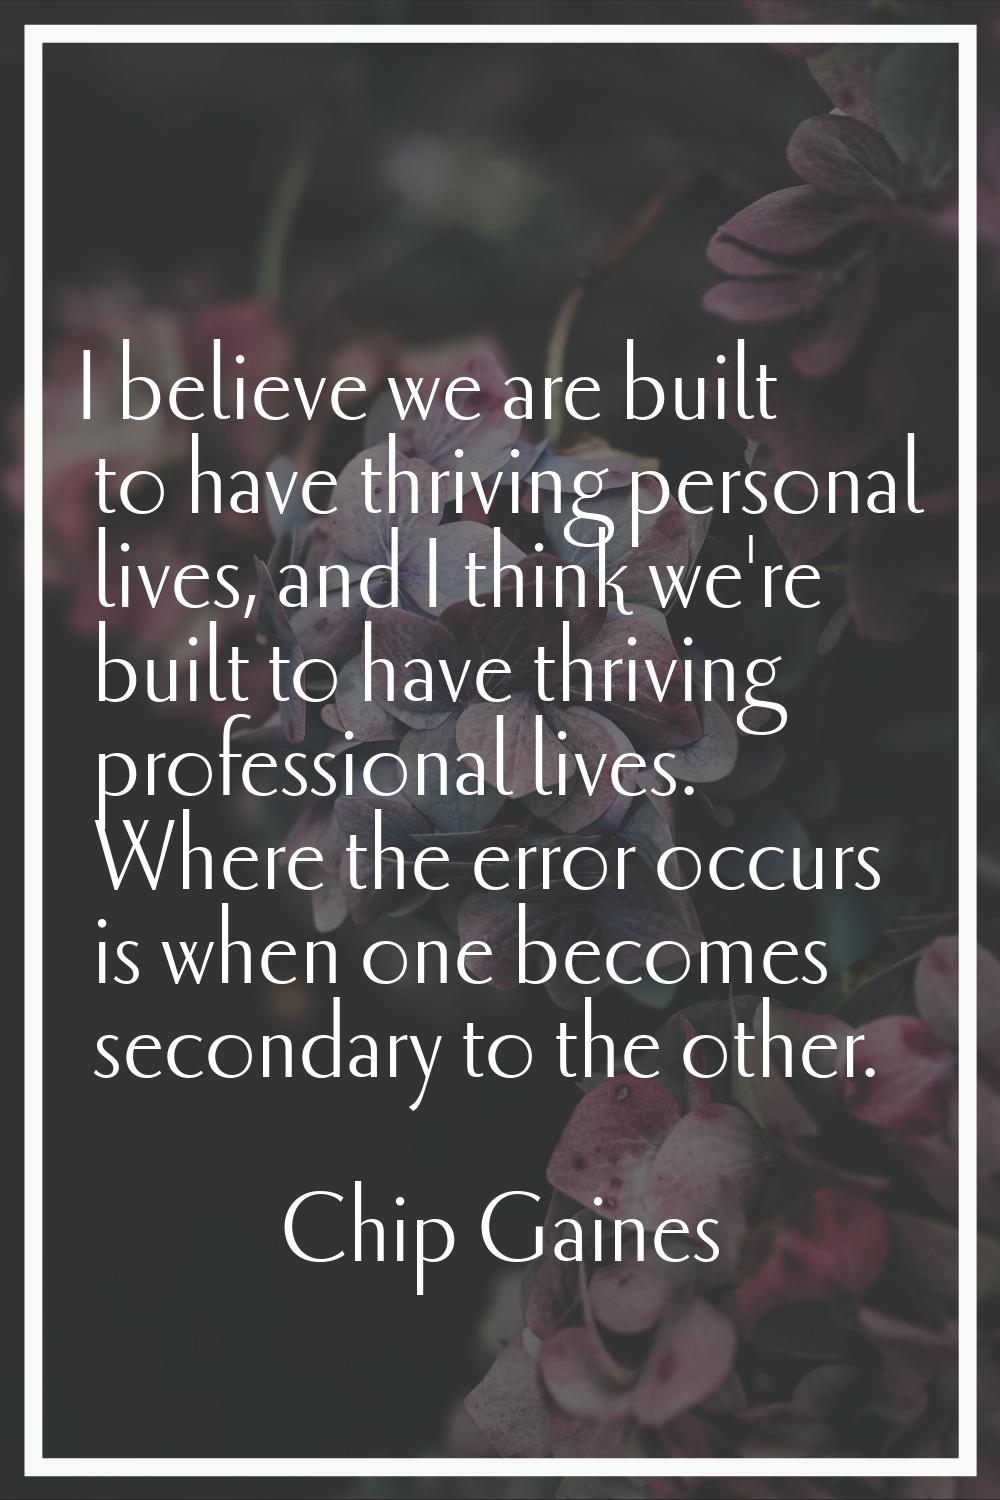 I believe we are built to have thriving personal lives, and I think we're built to have thriving pr